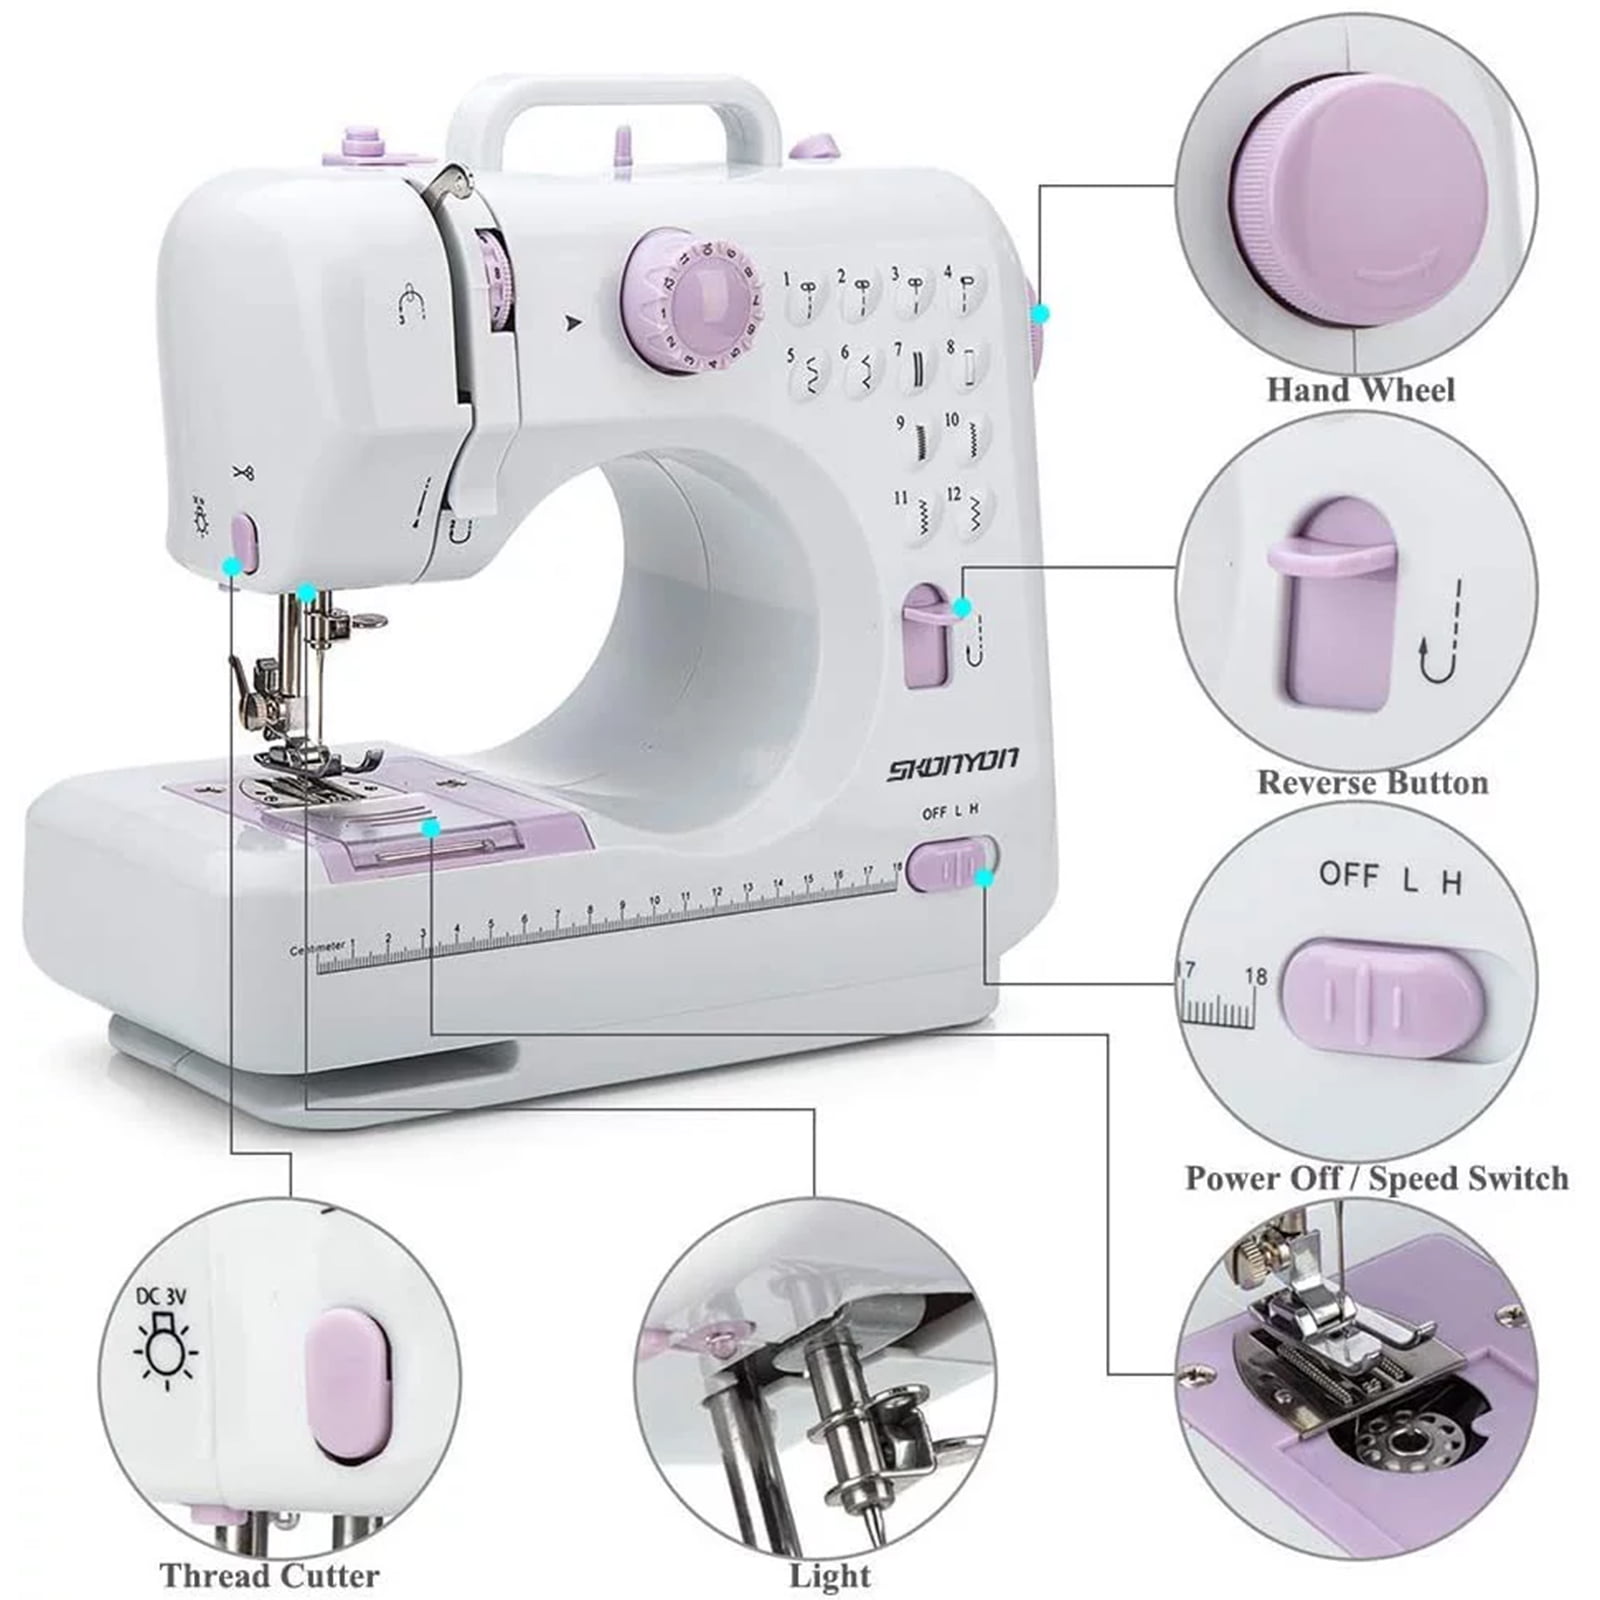 LANTRO JS Mini Handheld Sewing Machine, 12 Stitches, LED Sewing Lamp,  Double-Line Sewing, and More